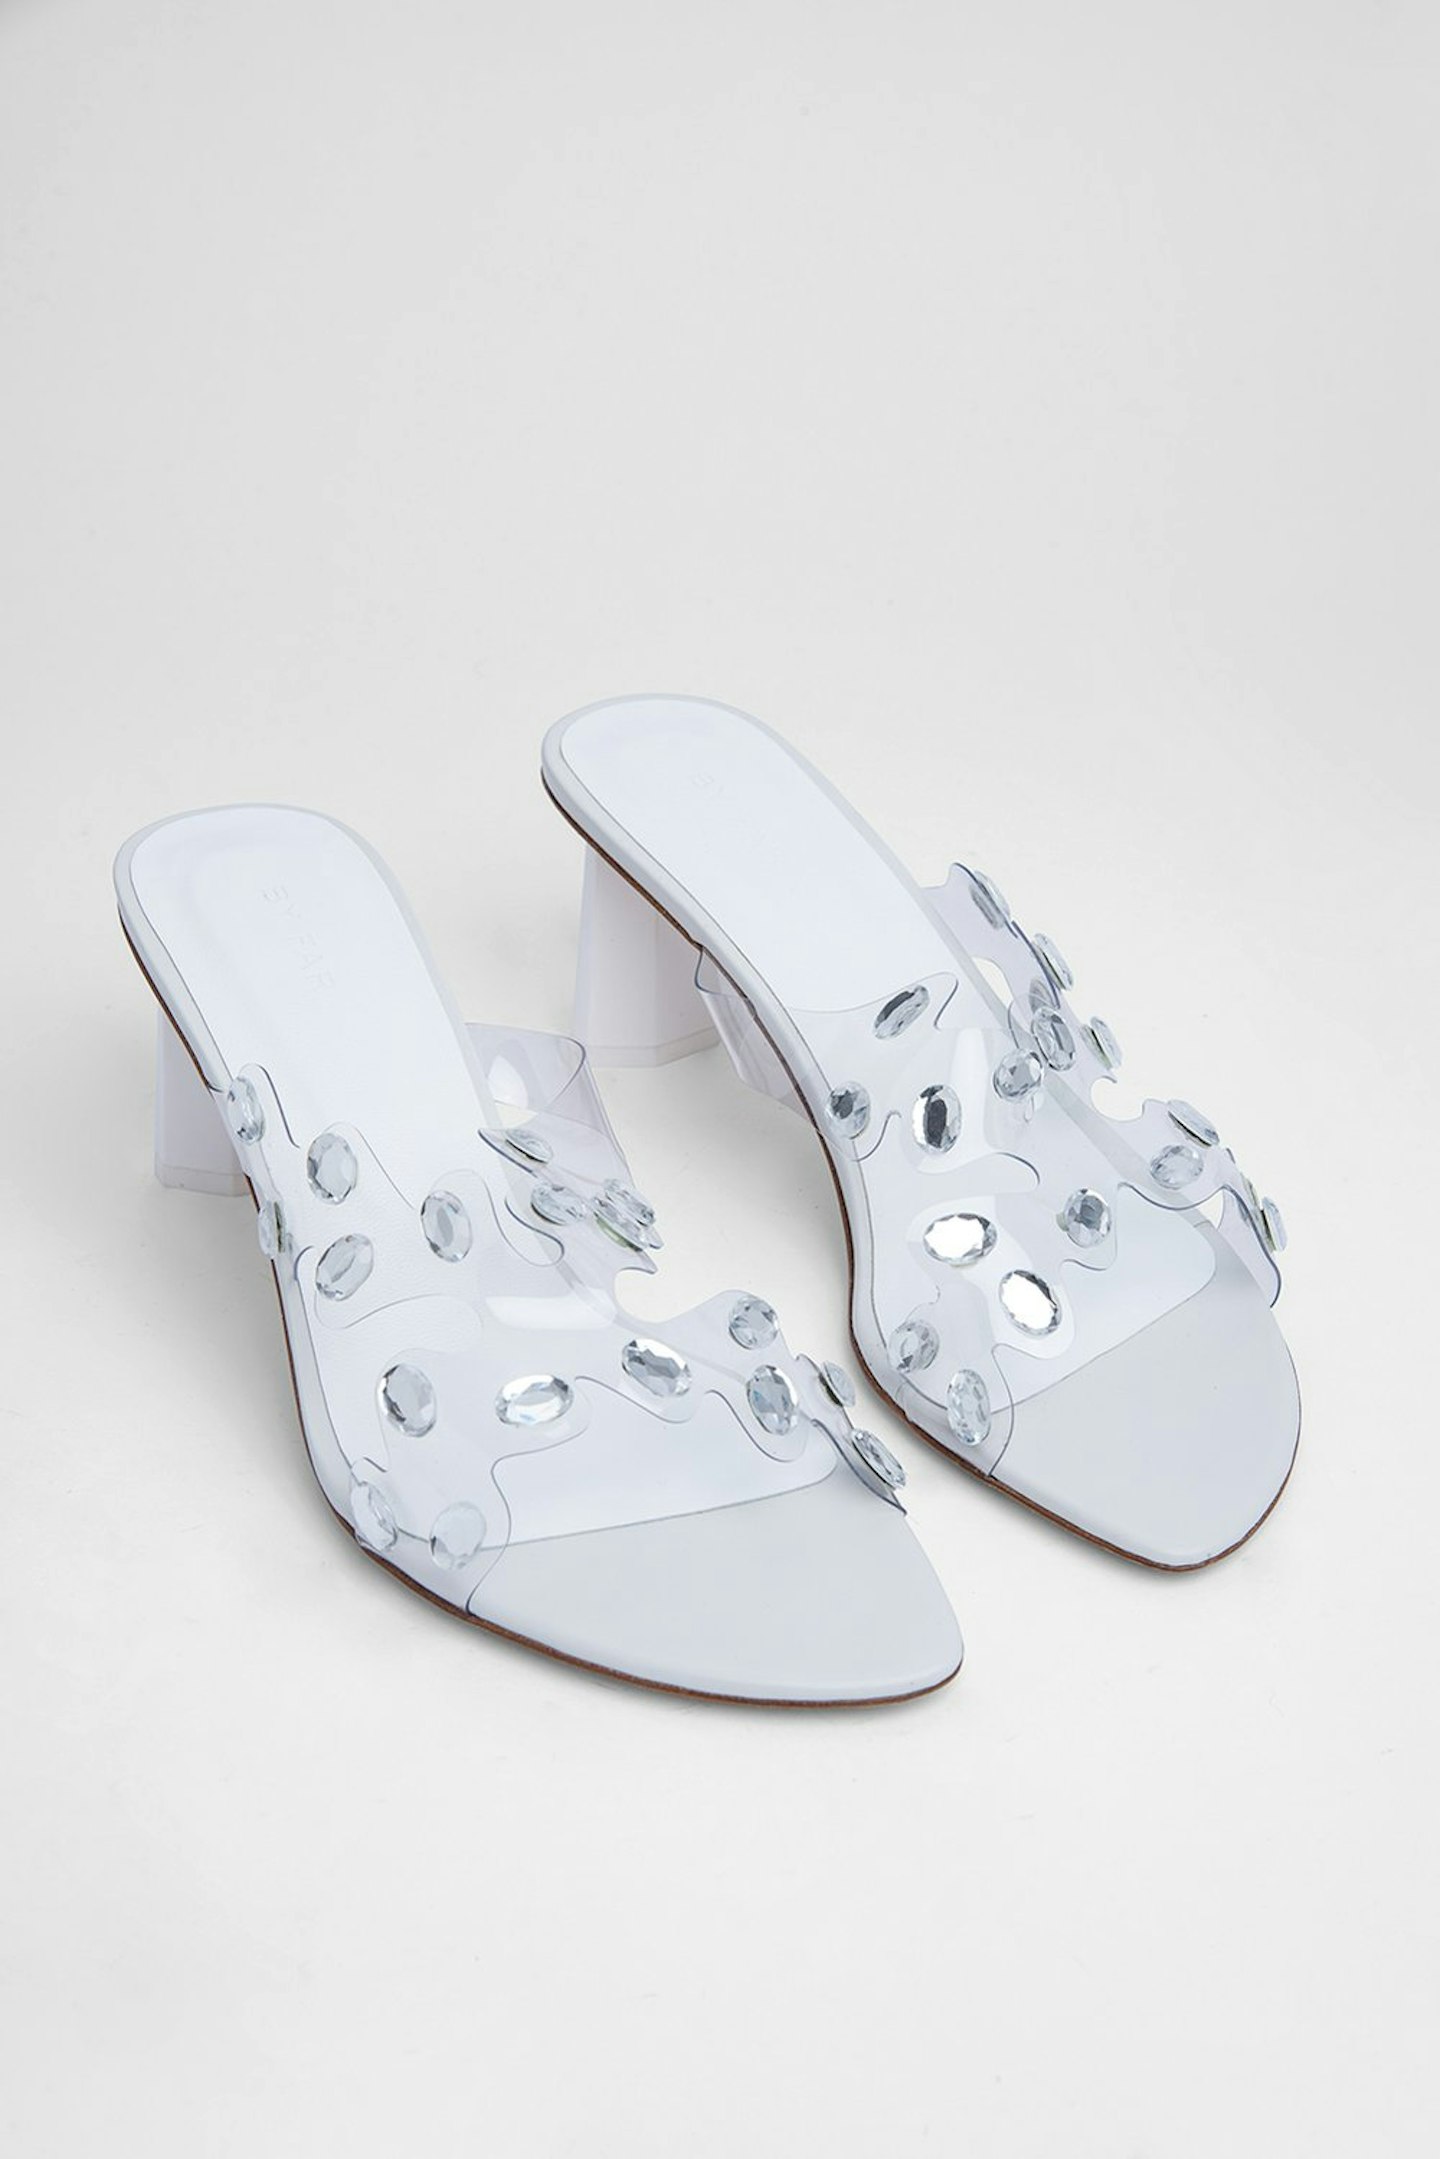 By Far, Gorgeous White Leather Sandals, £400